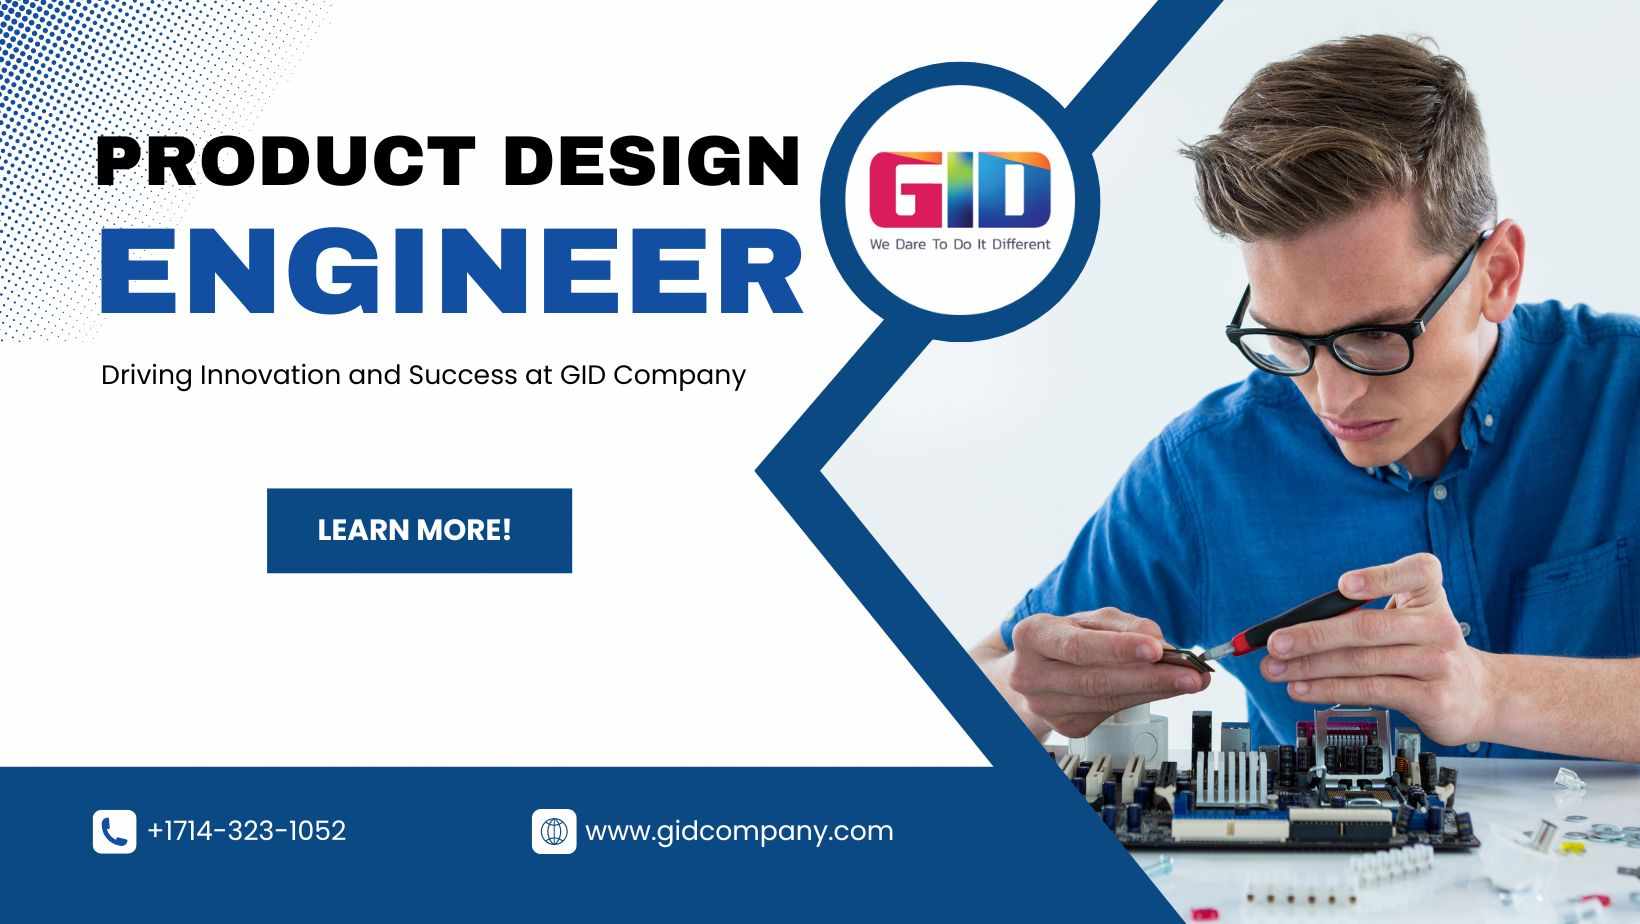 Role of a Product Design Engineer - Driving Innovation & Success - GID Company